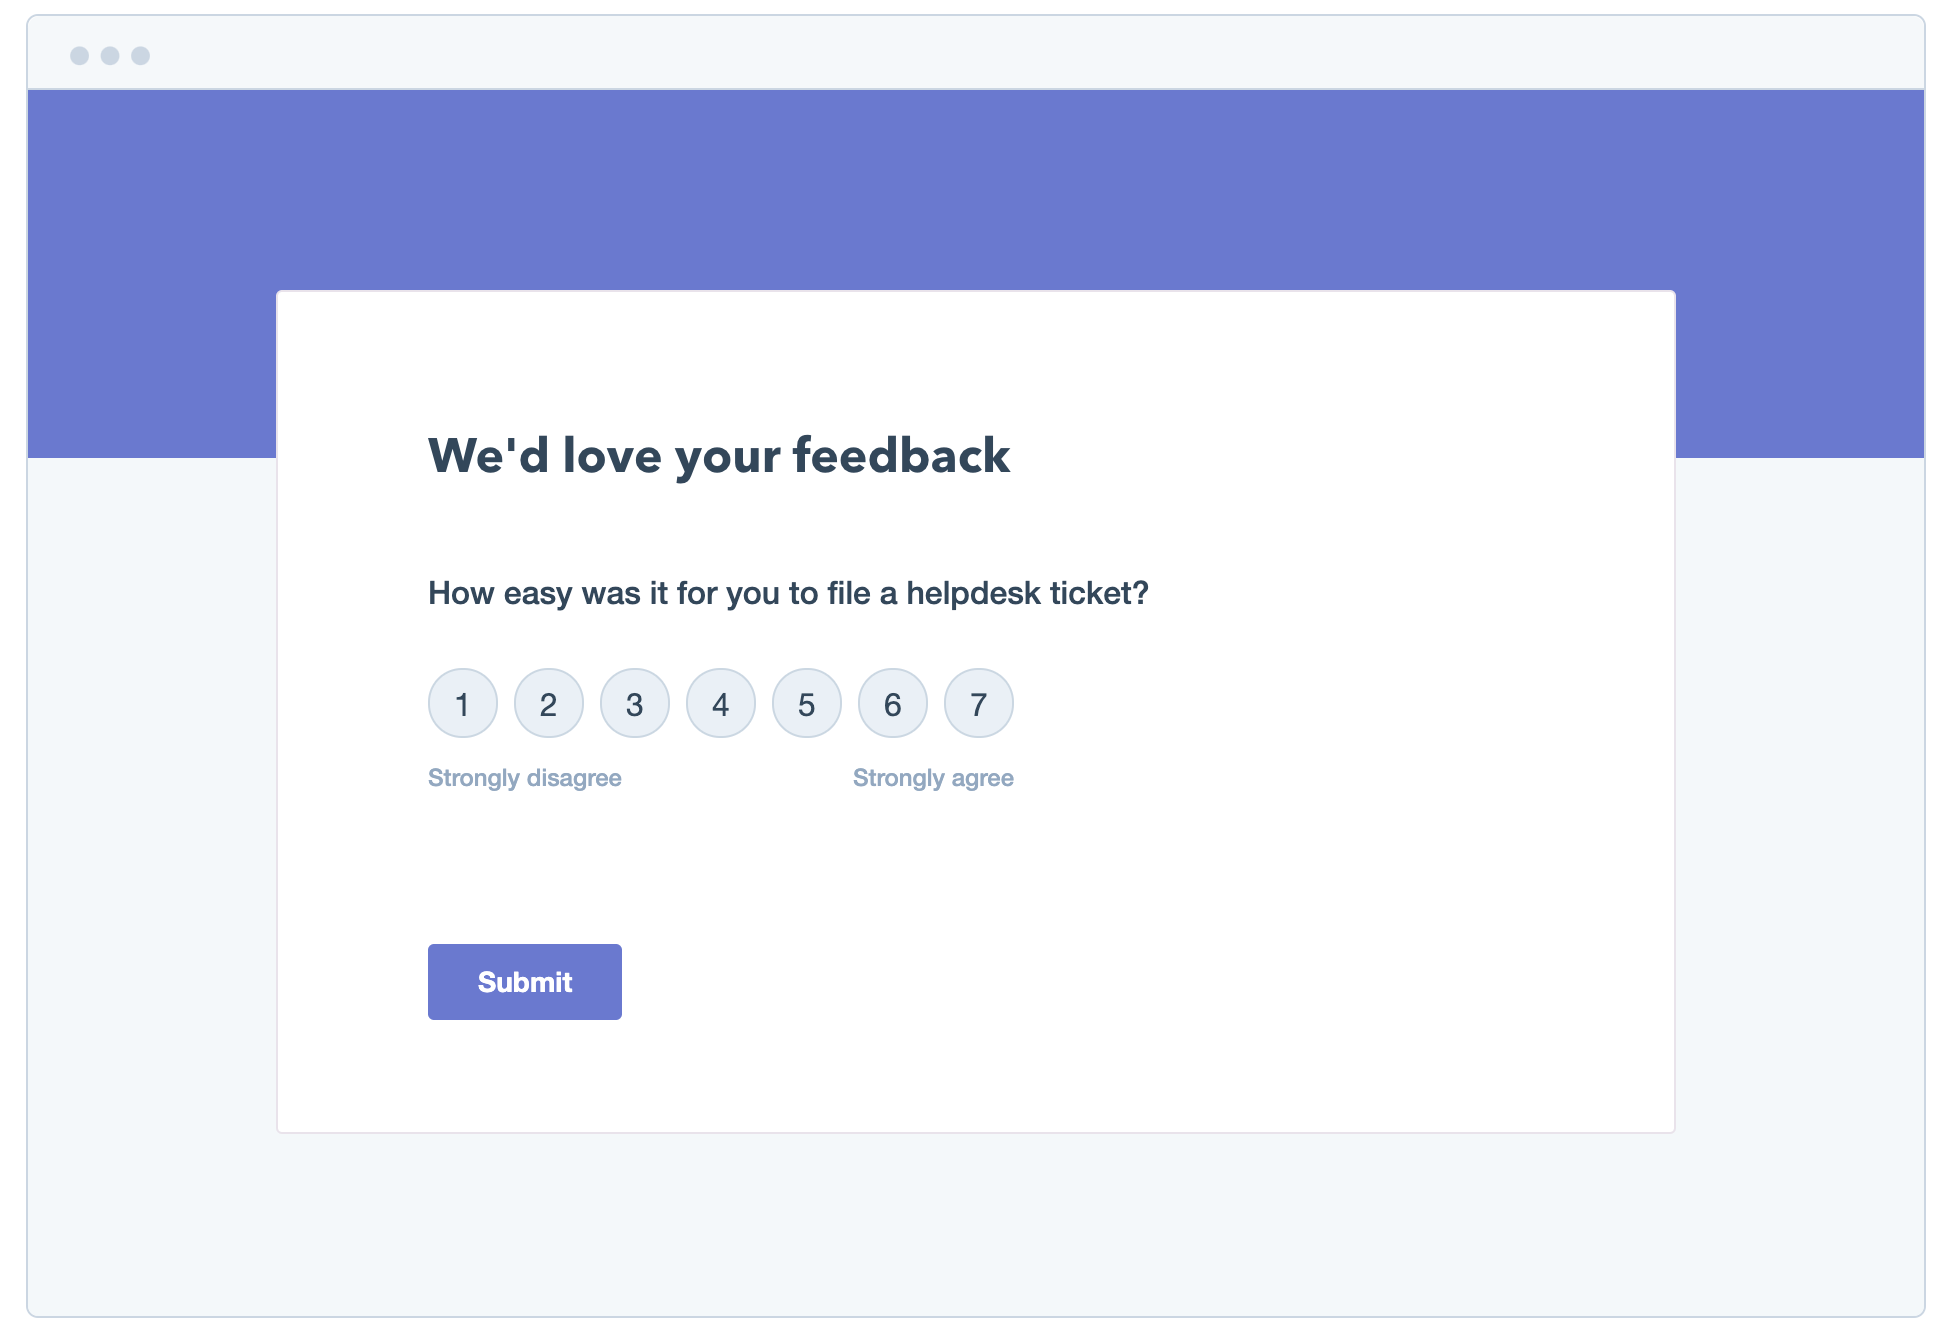 example of a customer effort score survey question using a likert scale